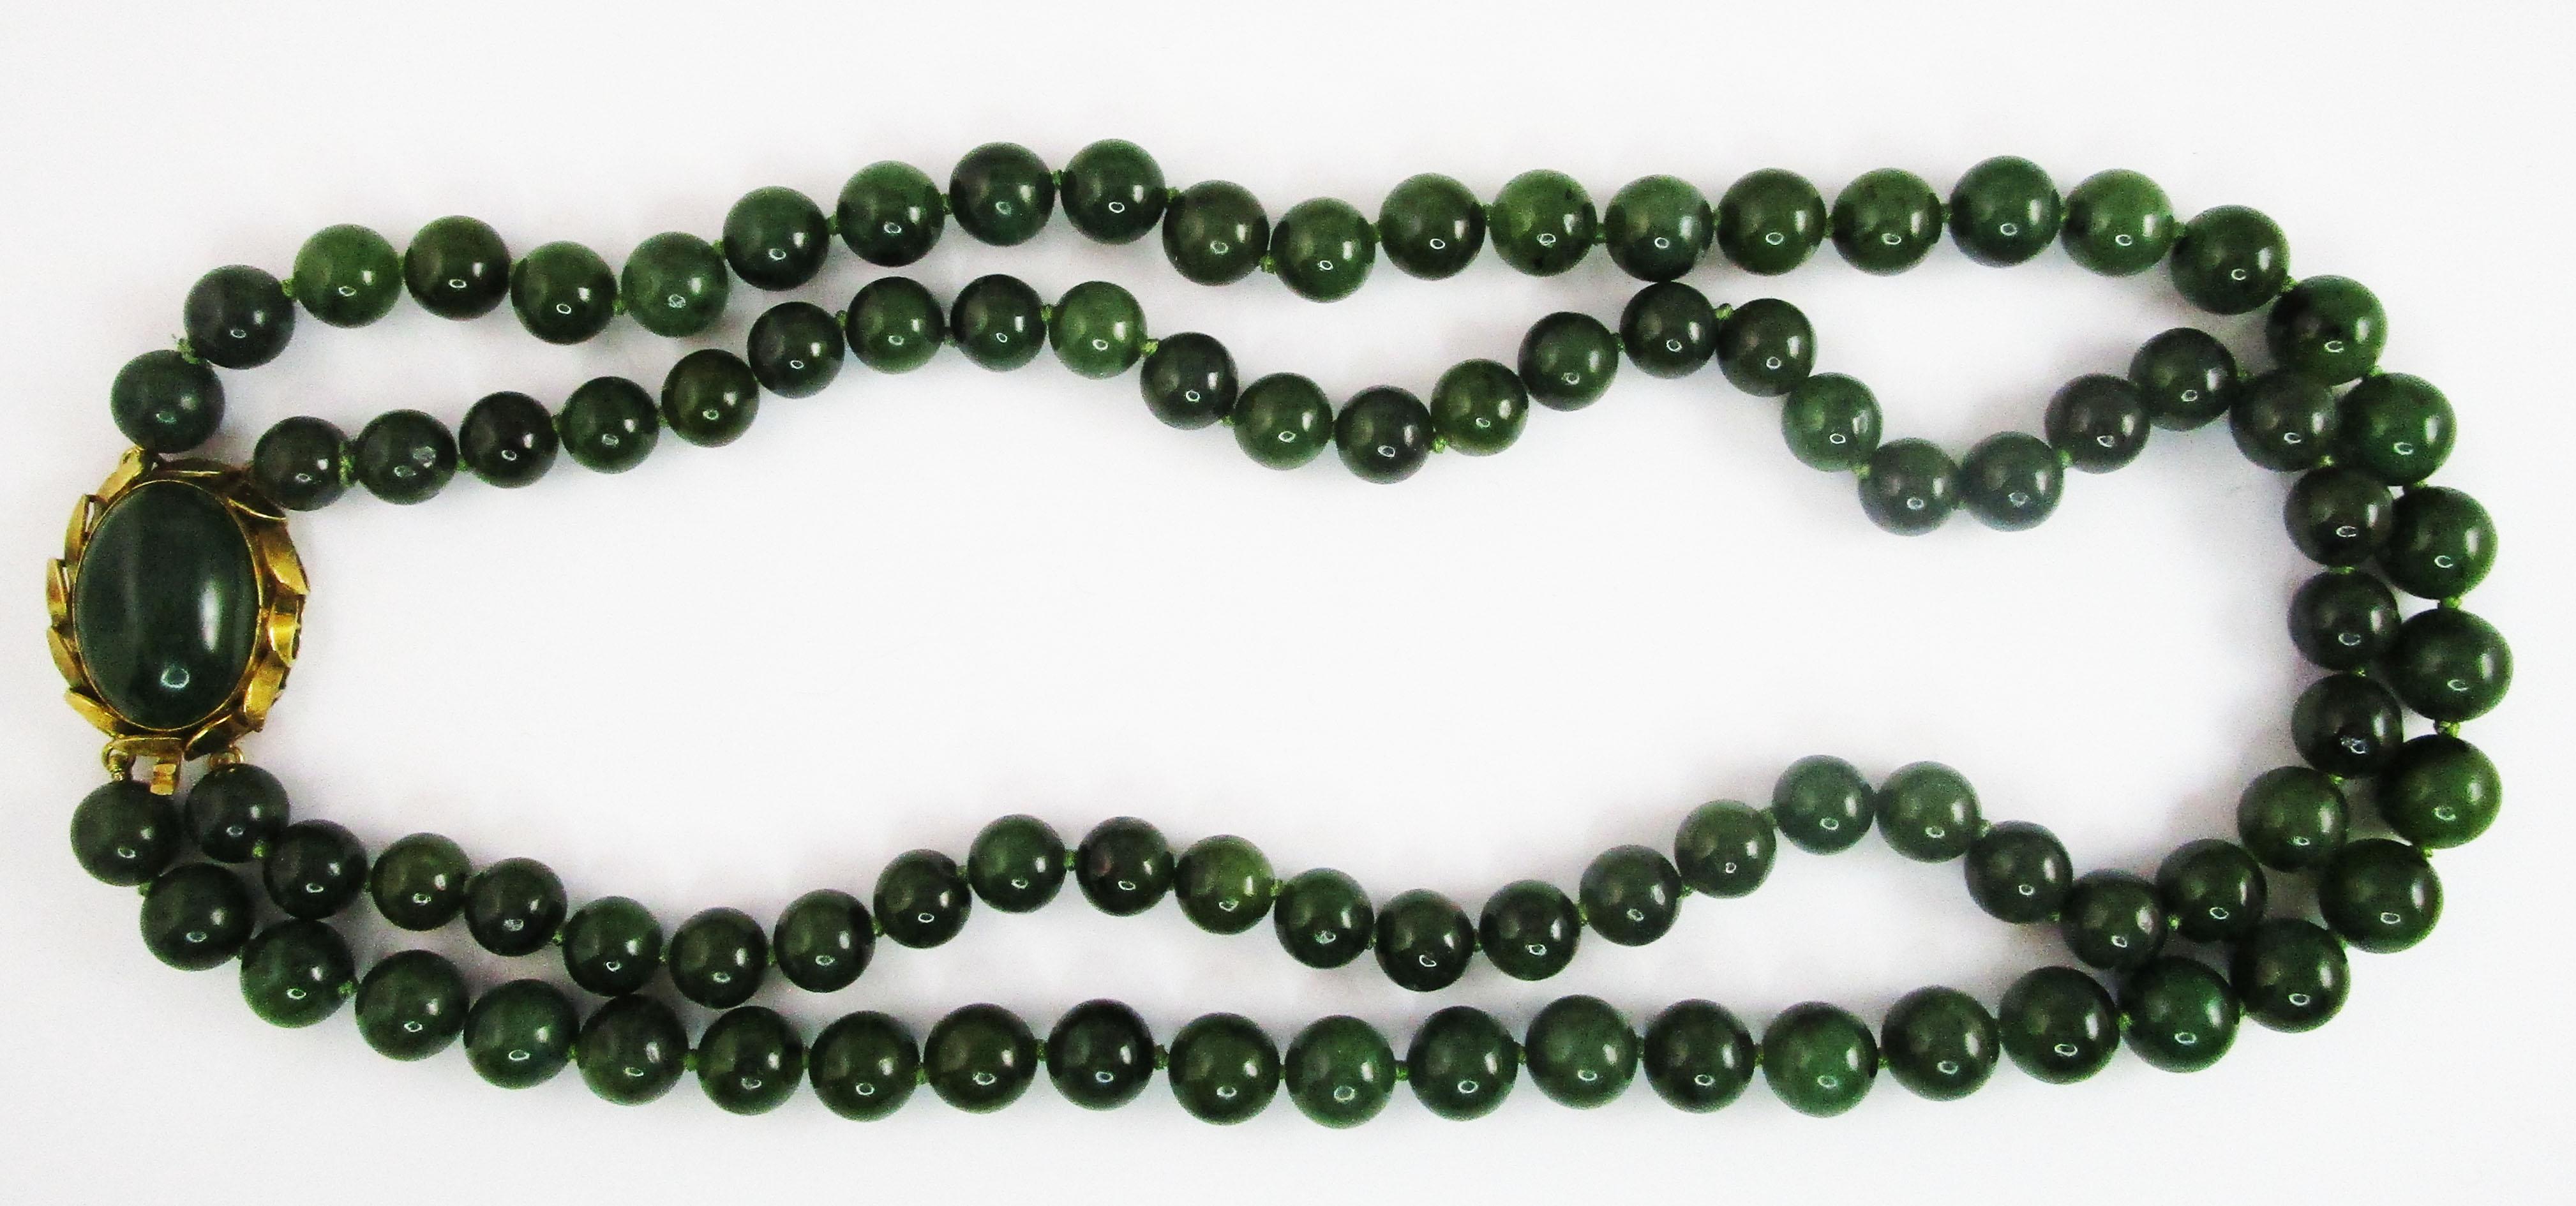 Modernist Midcentury Double Strand Jade Necklace with 14 Karat Gold Clasp